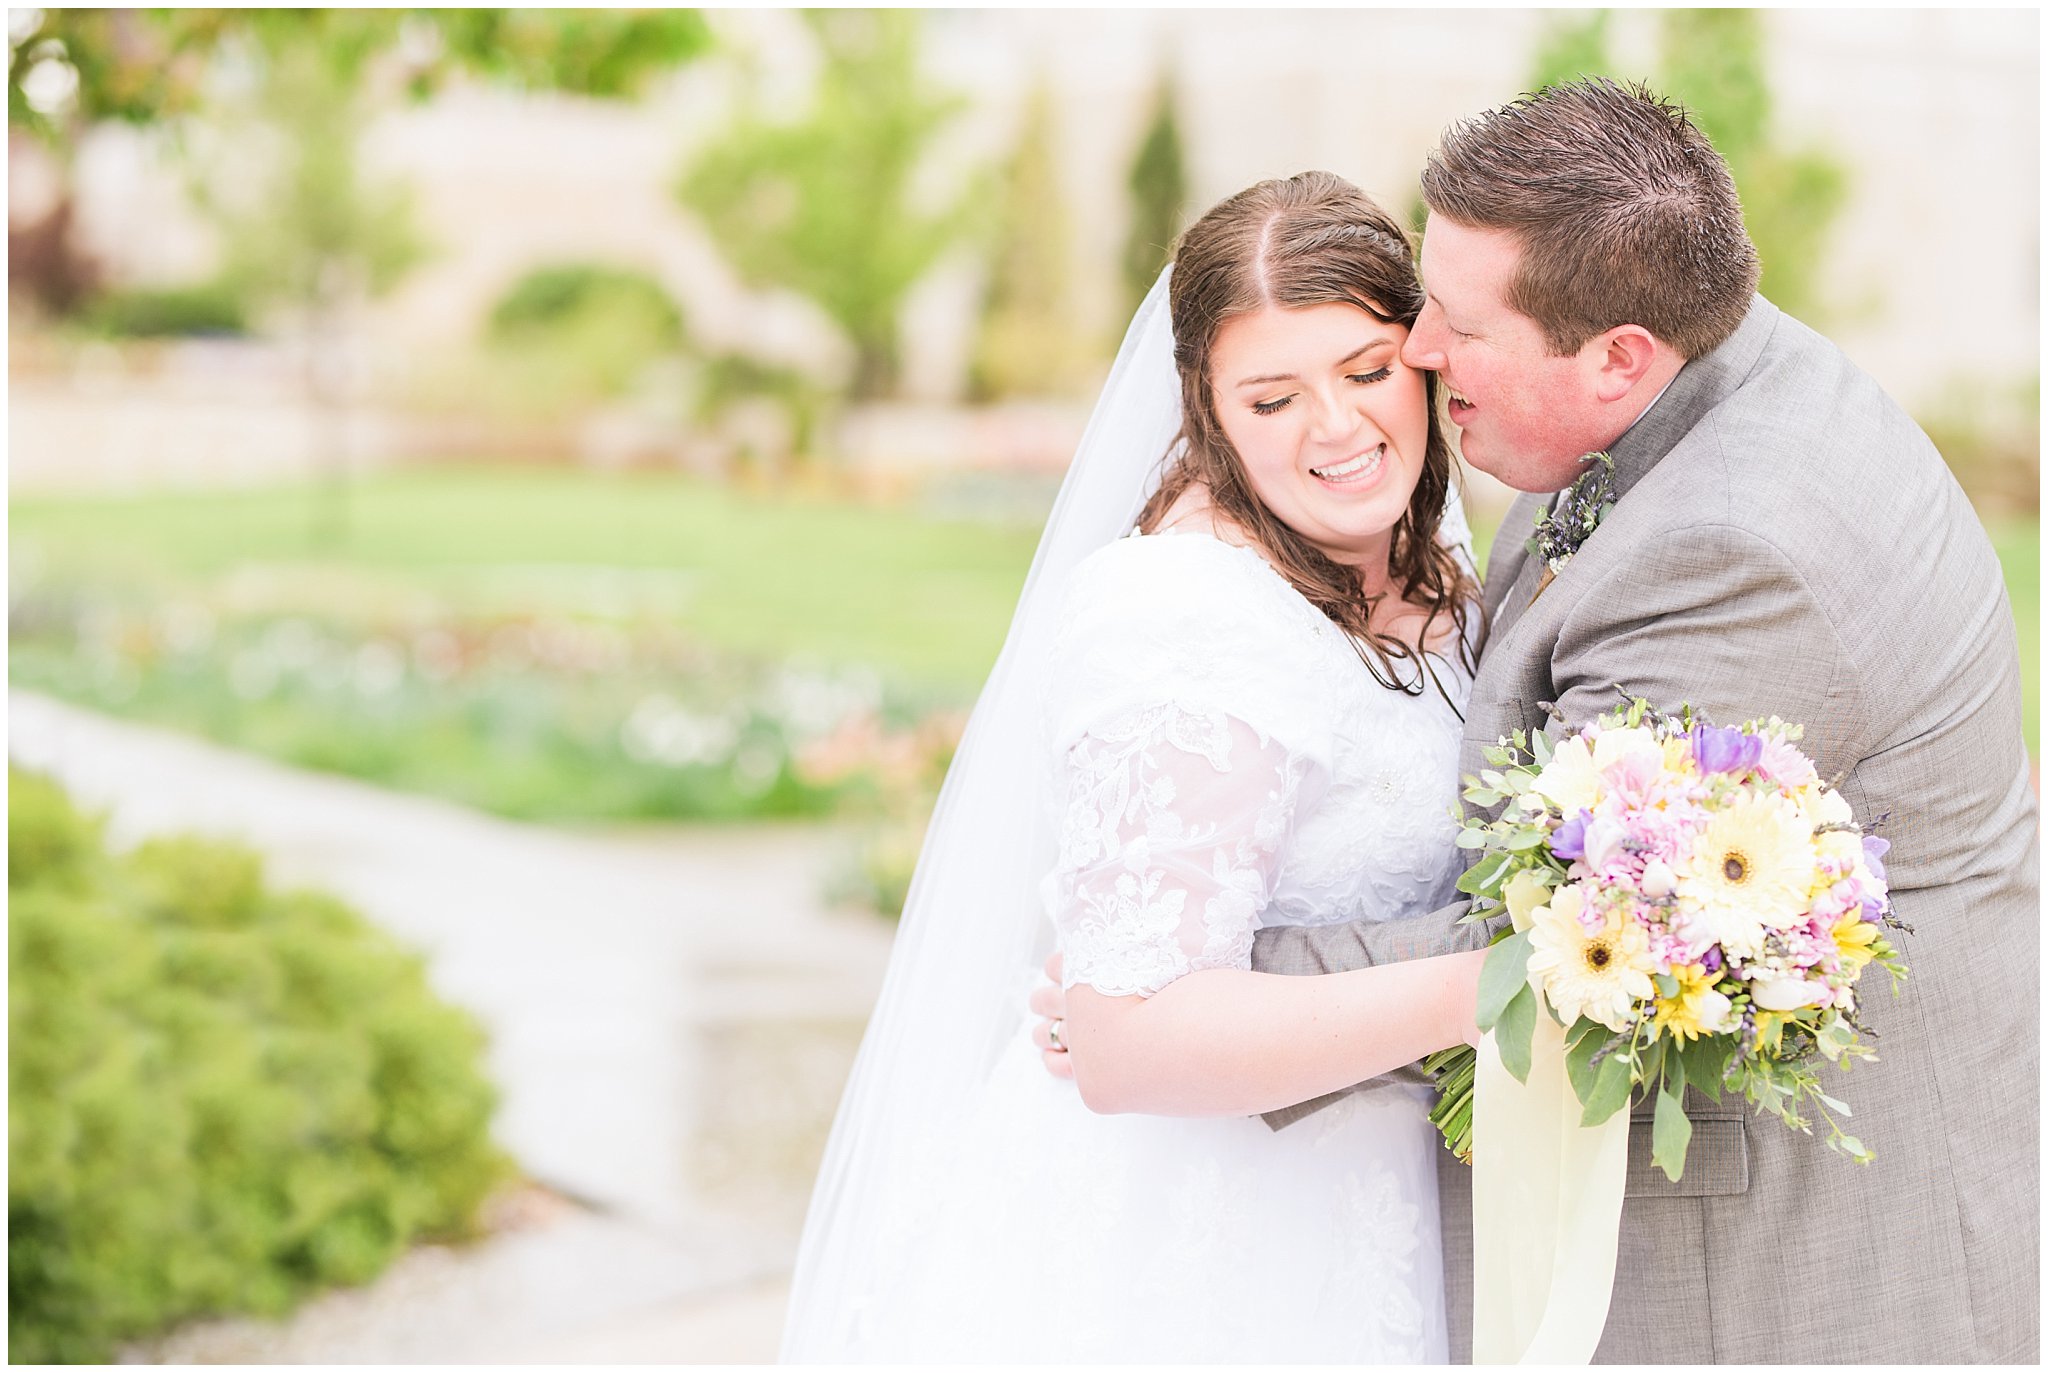 Bride and groom during rainy spring wedding at the Ogden Temple | Top Utah Wedding and Couples Photos 2019 | Jessie and Dallin Photography